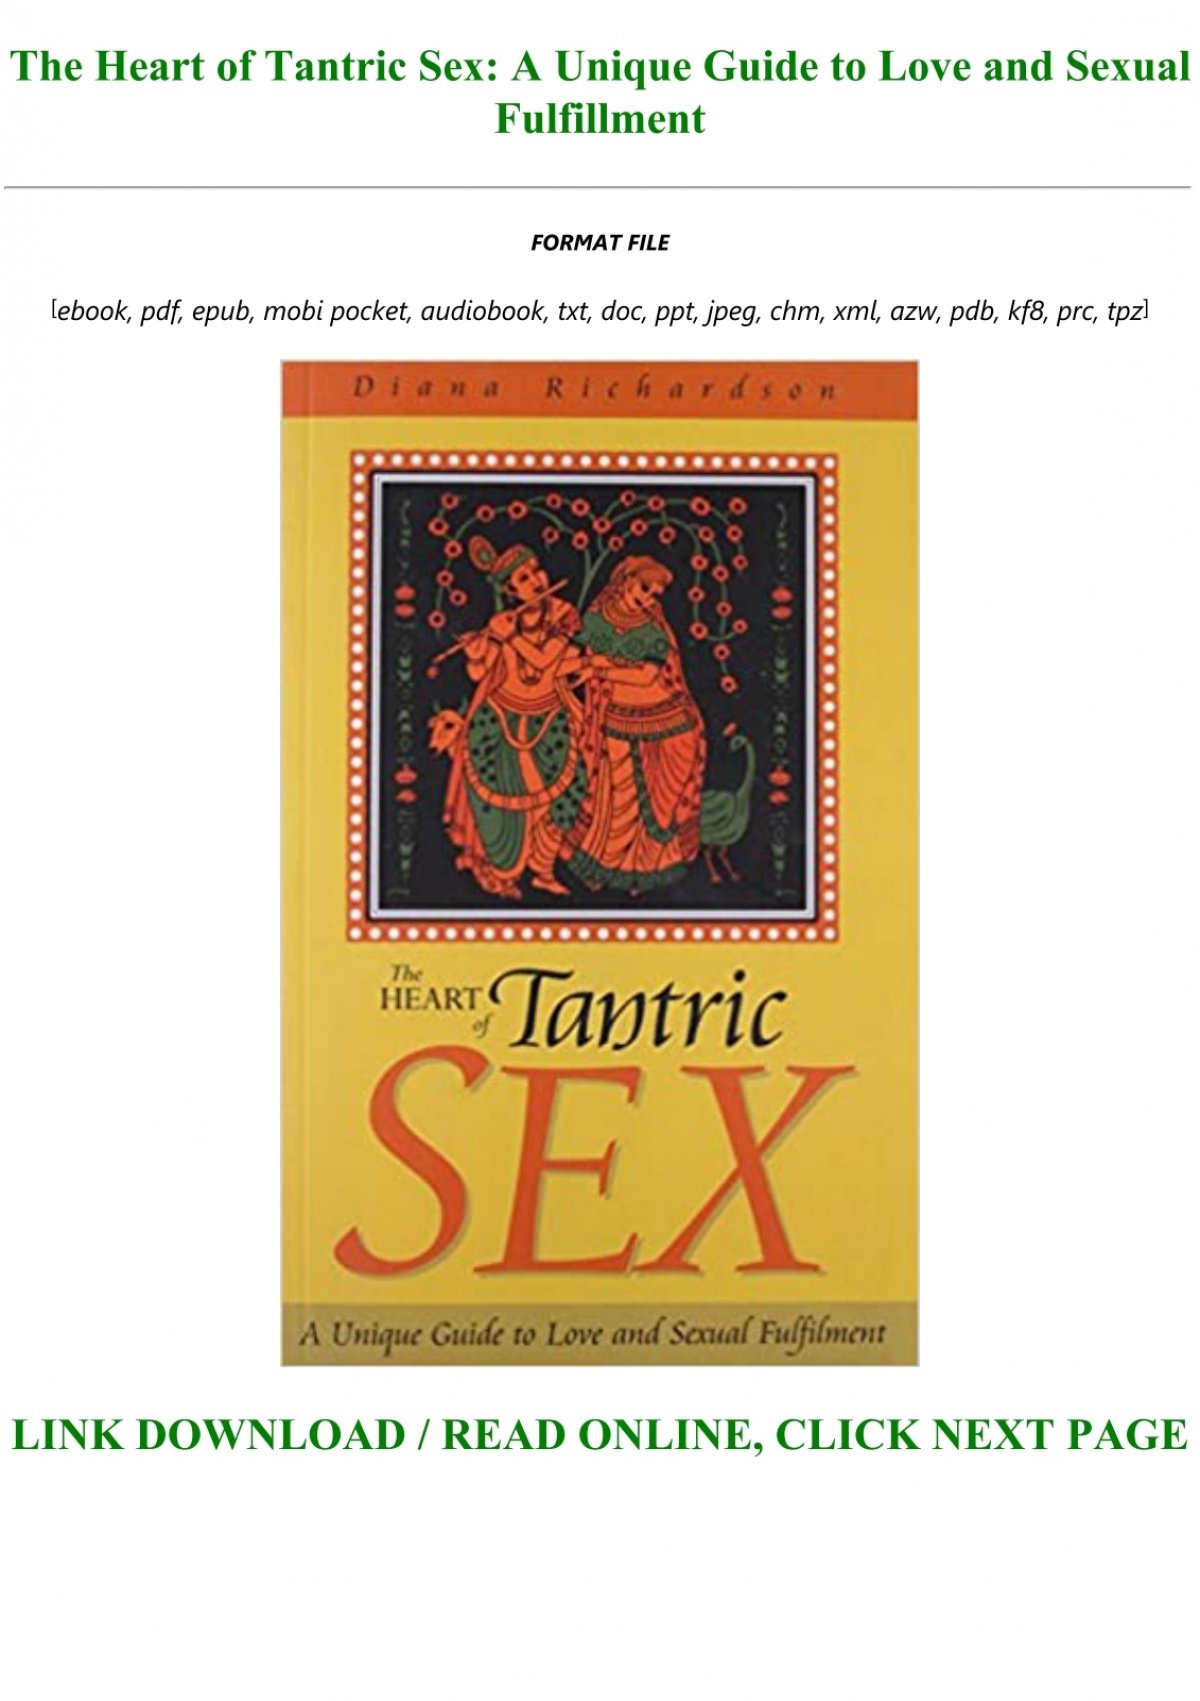 The Heart Of Tantric Sex A Unique Guide To Love And Sexual Fulfillment